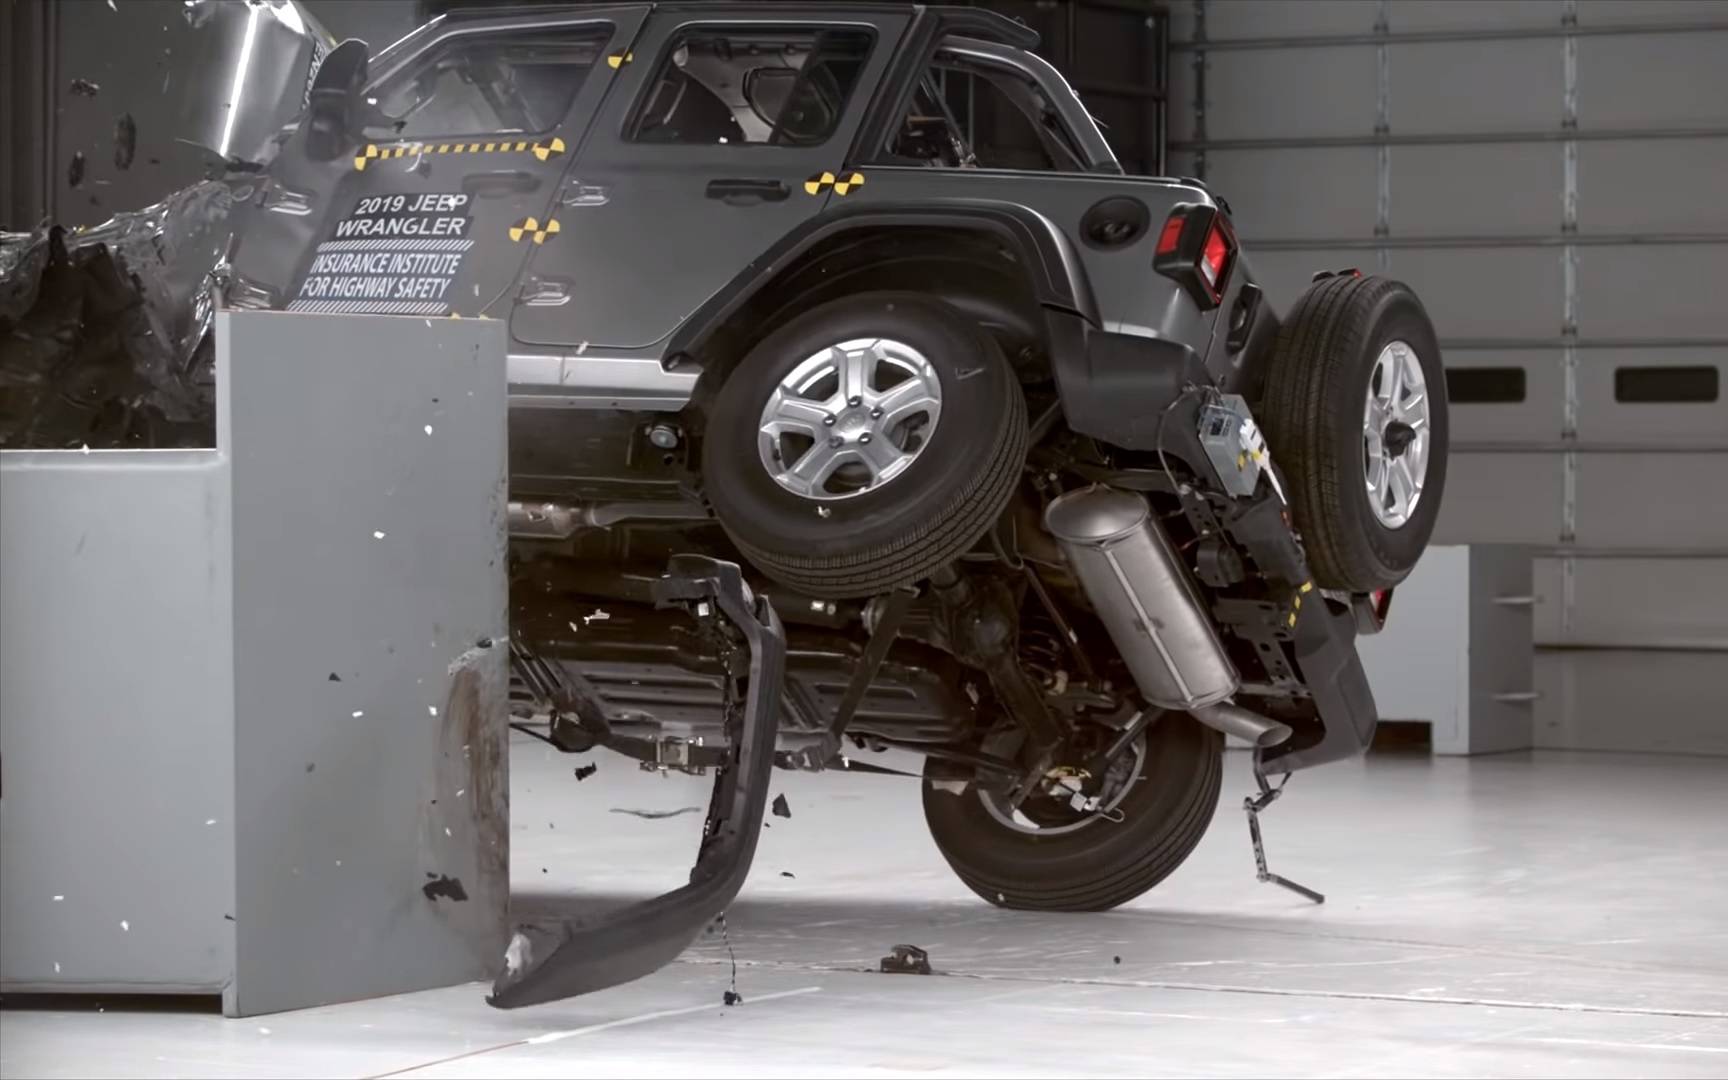 Watch: Jeep Wrangler Rolls Over Again in IIHS Crash Test - The Car Guide